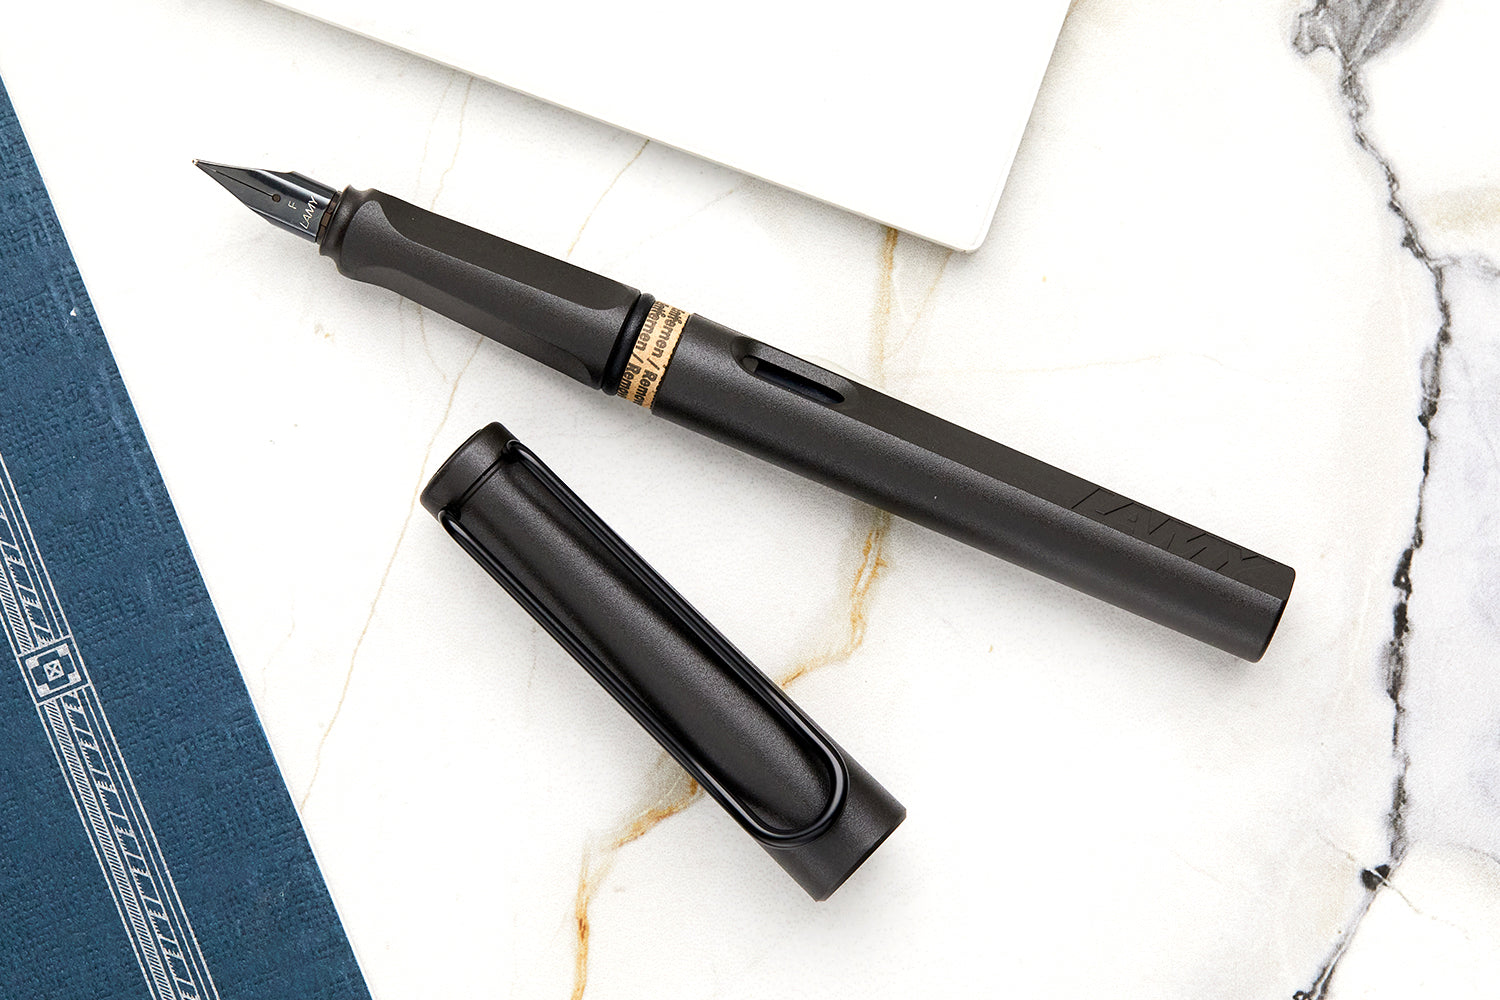 LAMY safari fountain pen in charcoal with the cardboard spacer ring